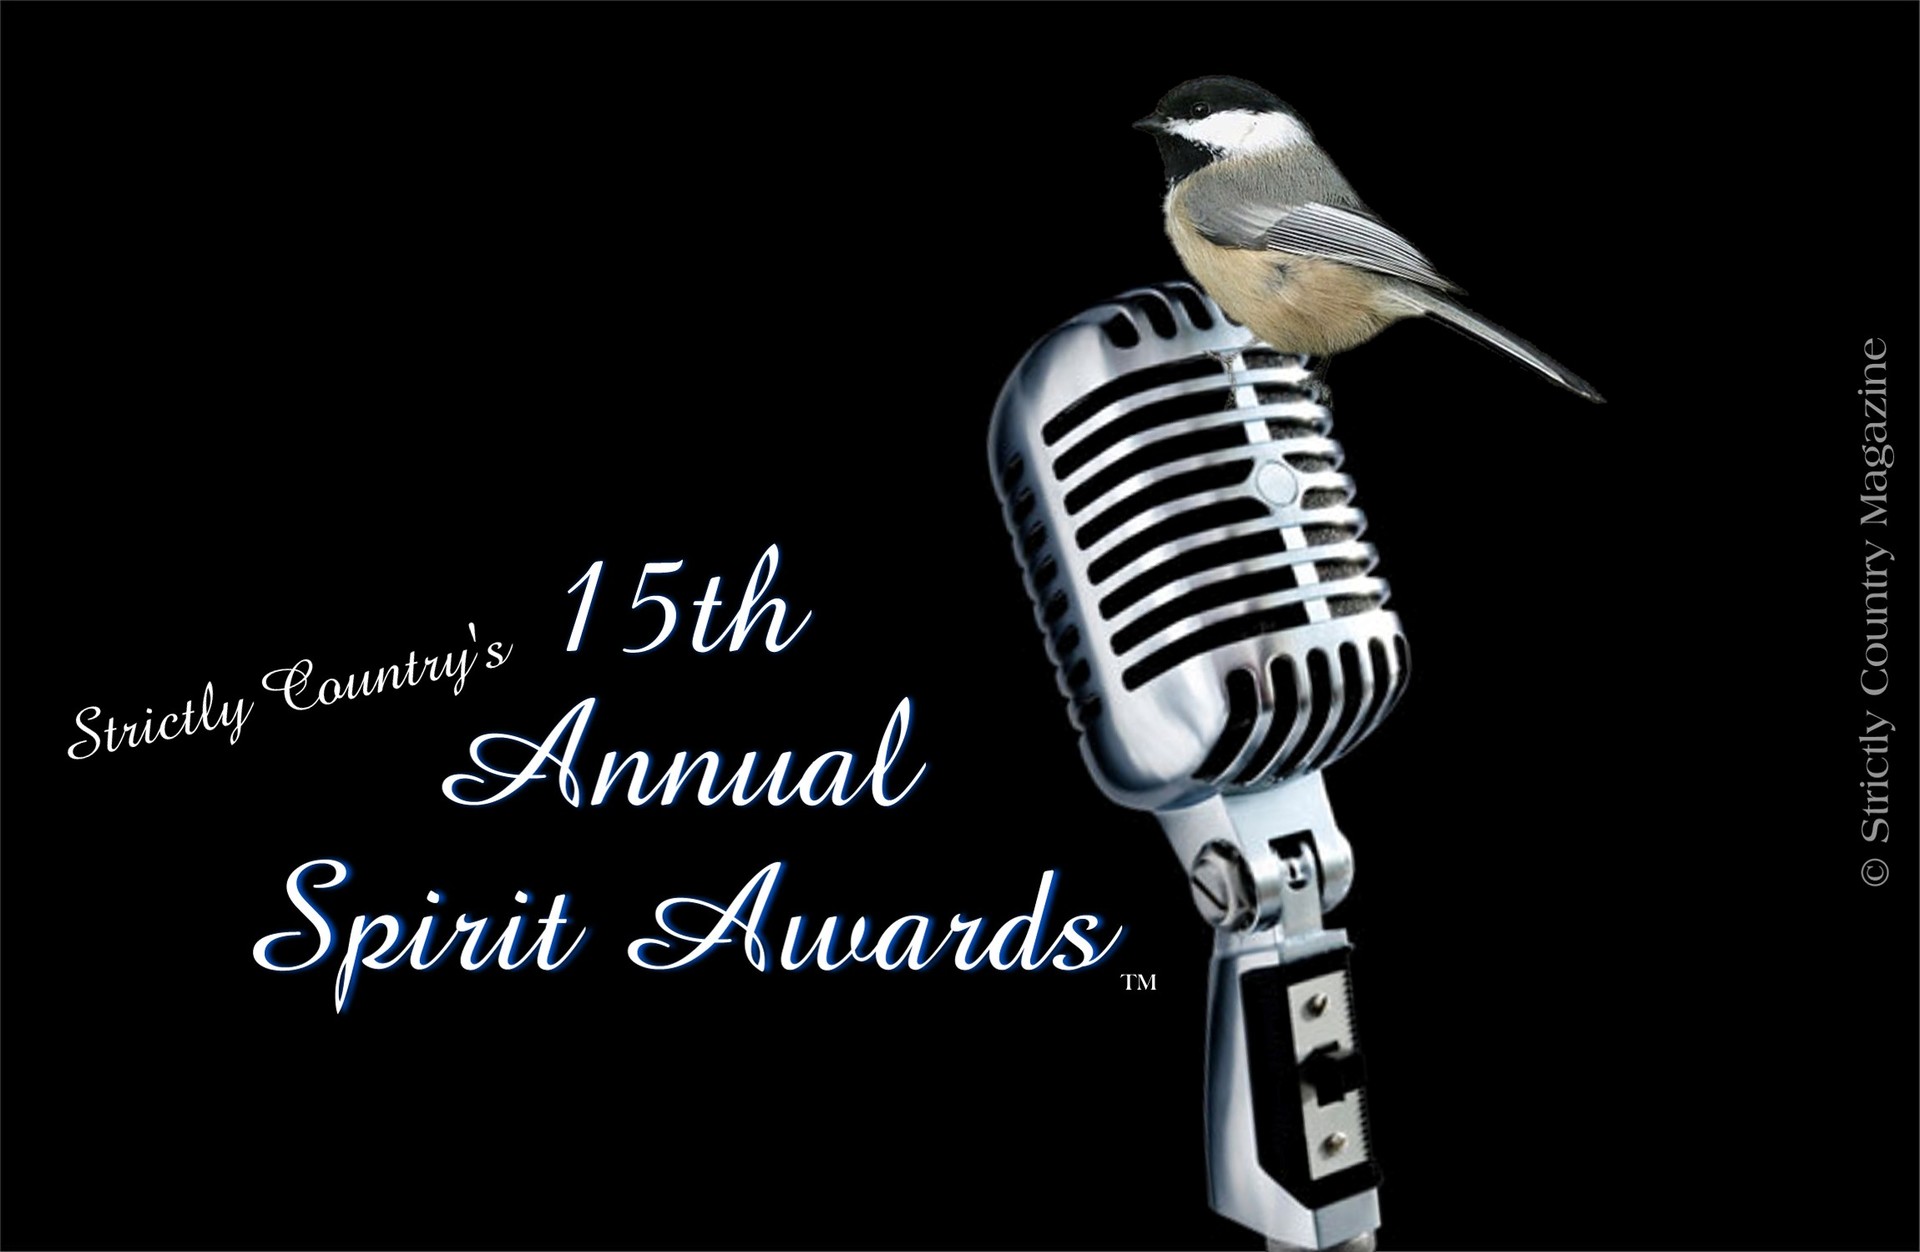 Strictly Country Magazine copyright 15th Annual Spirit Awards official logo